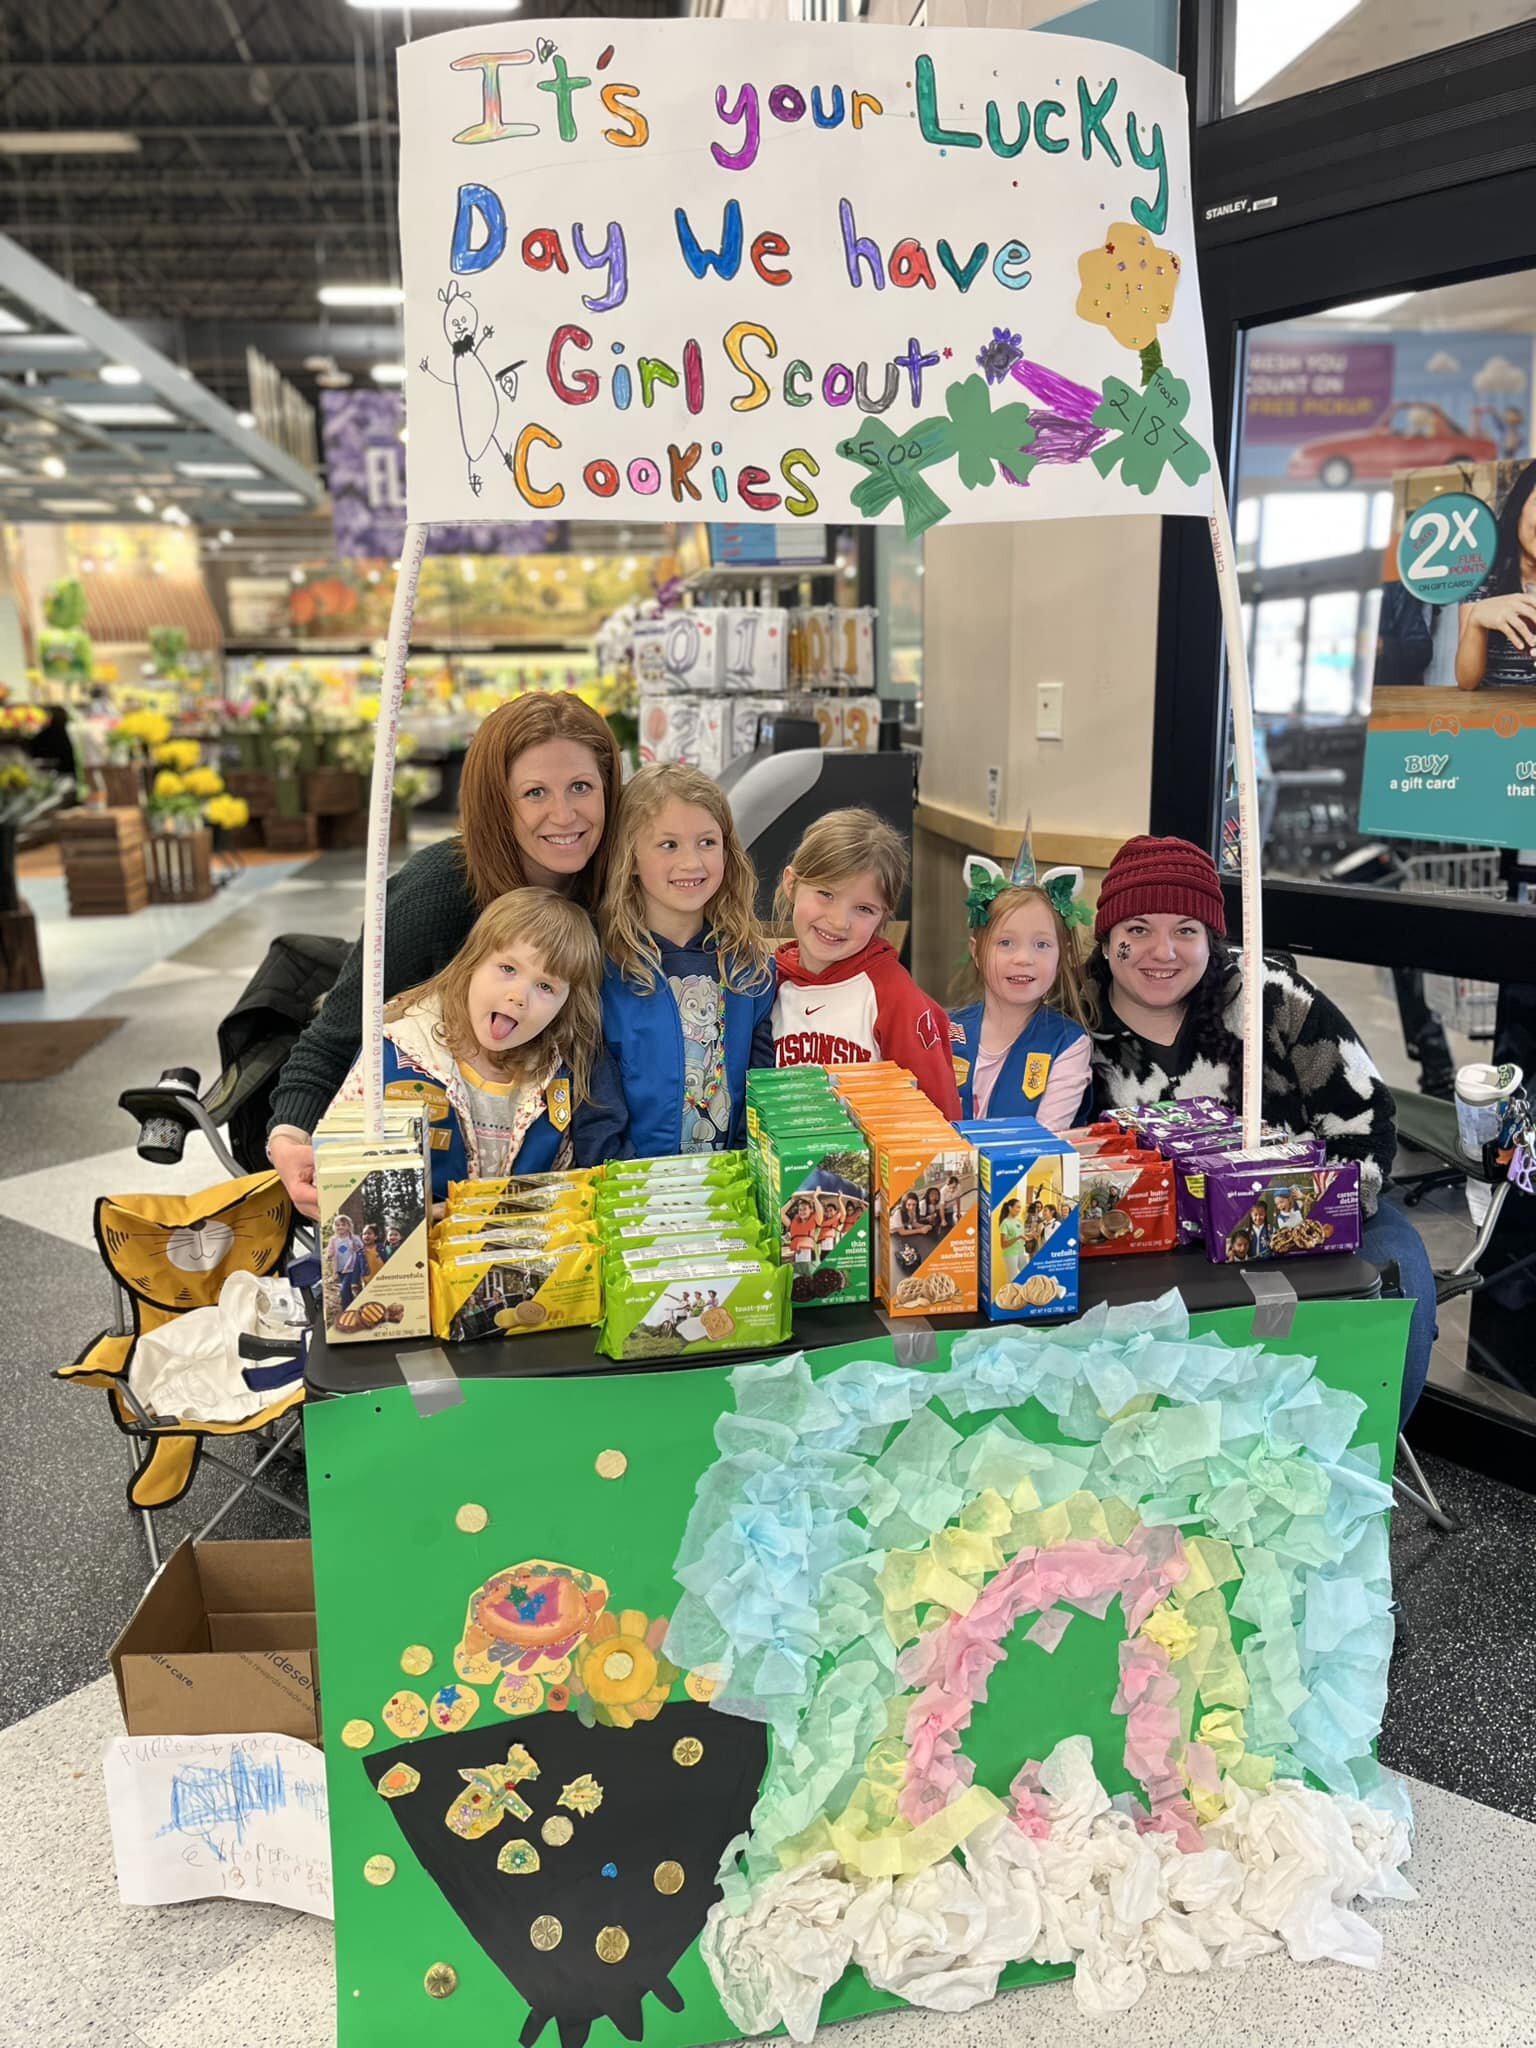 It&rsquo;s your lucky day! 🍀 Daisy Troop 2187 has Girl Scout Cookies today at Pic N Save in Neenah! (By Zuppas)